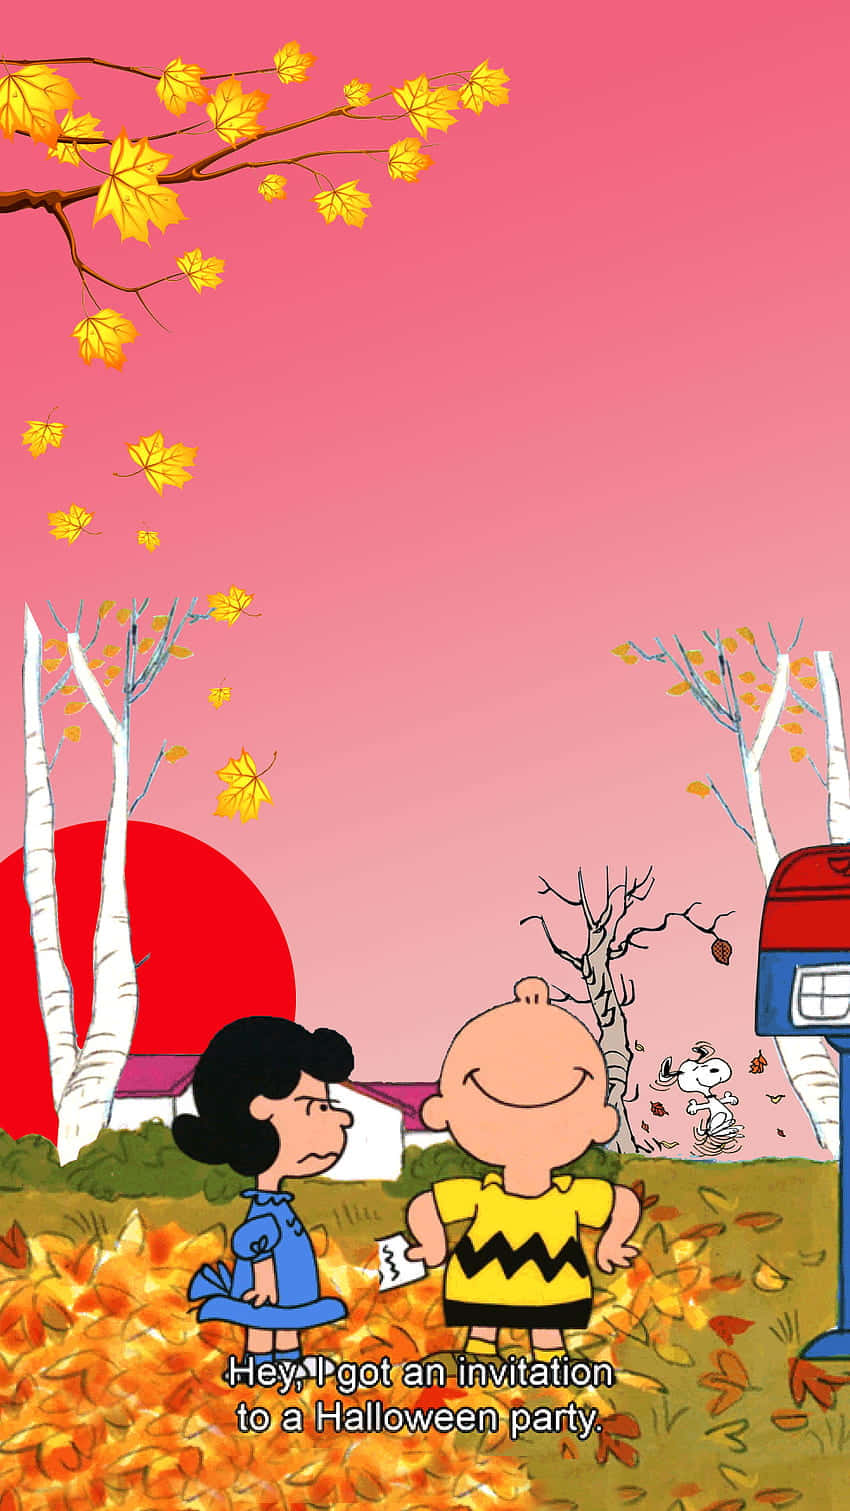 Snoopy Taking a Fall Wallpaper